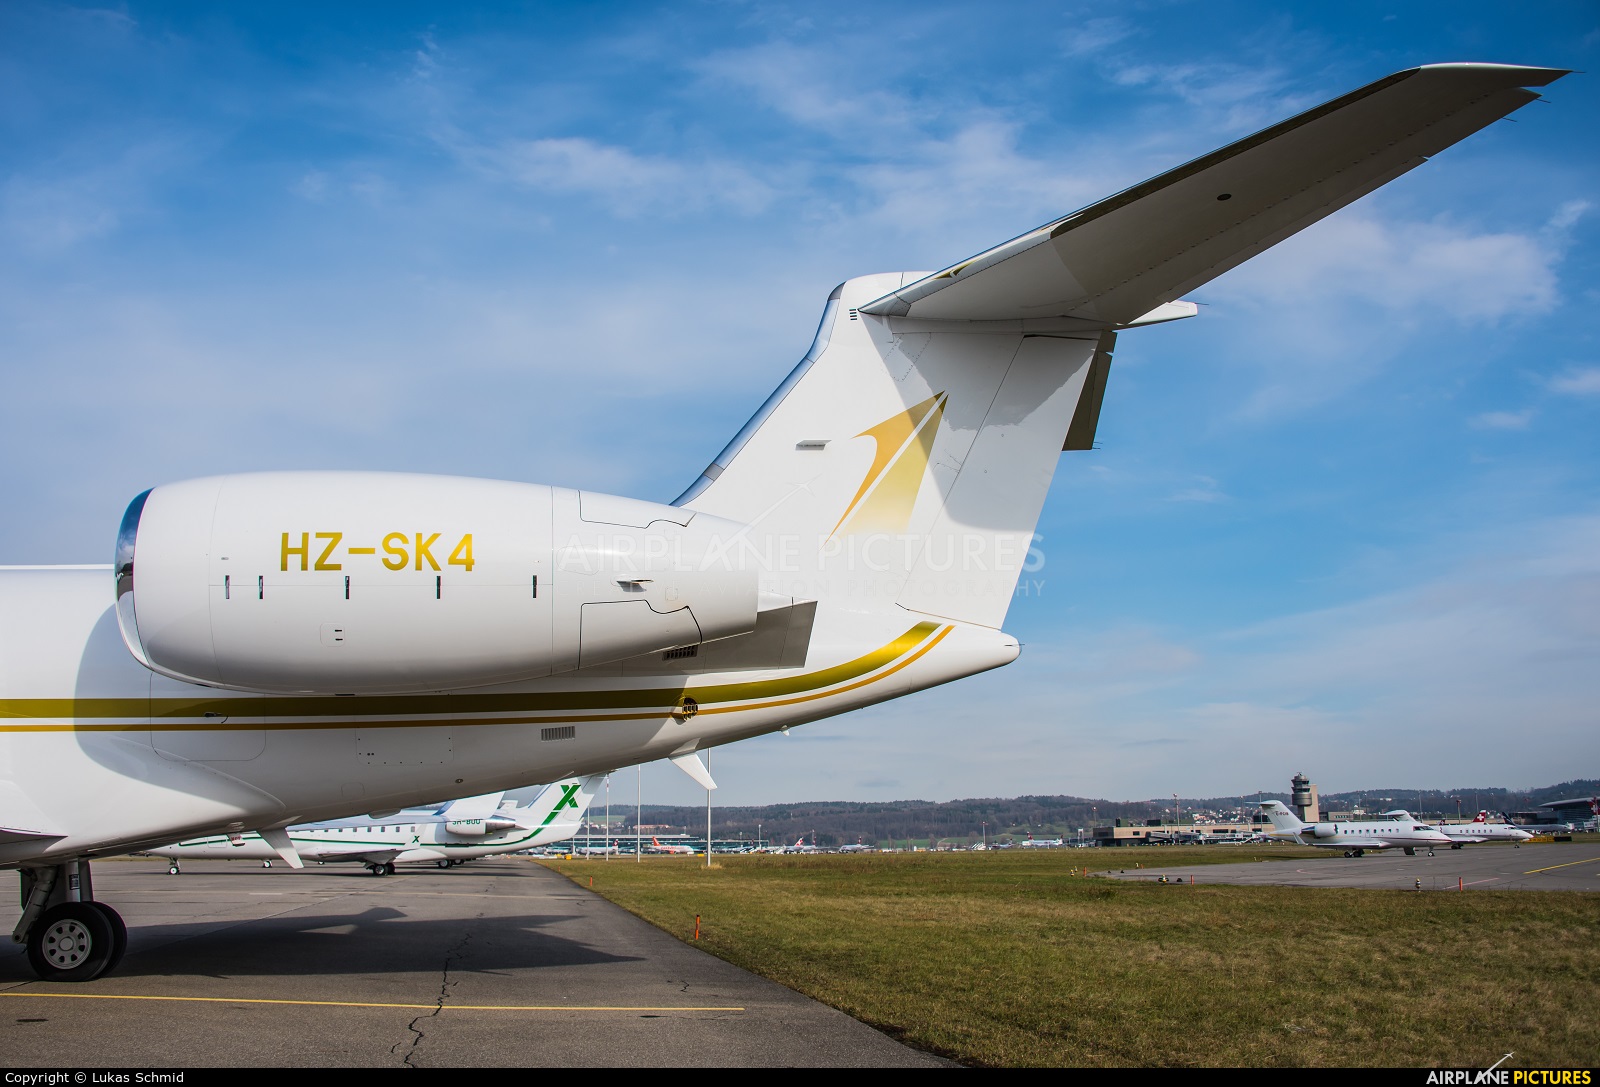 Sky Prime Aviation Services HZ-SK4 aircraft at Zurich